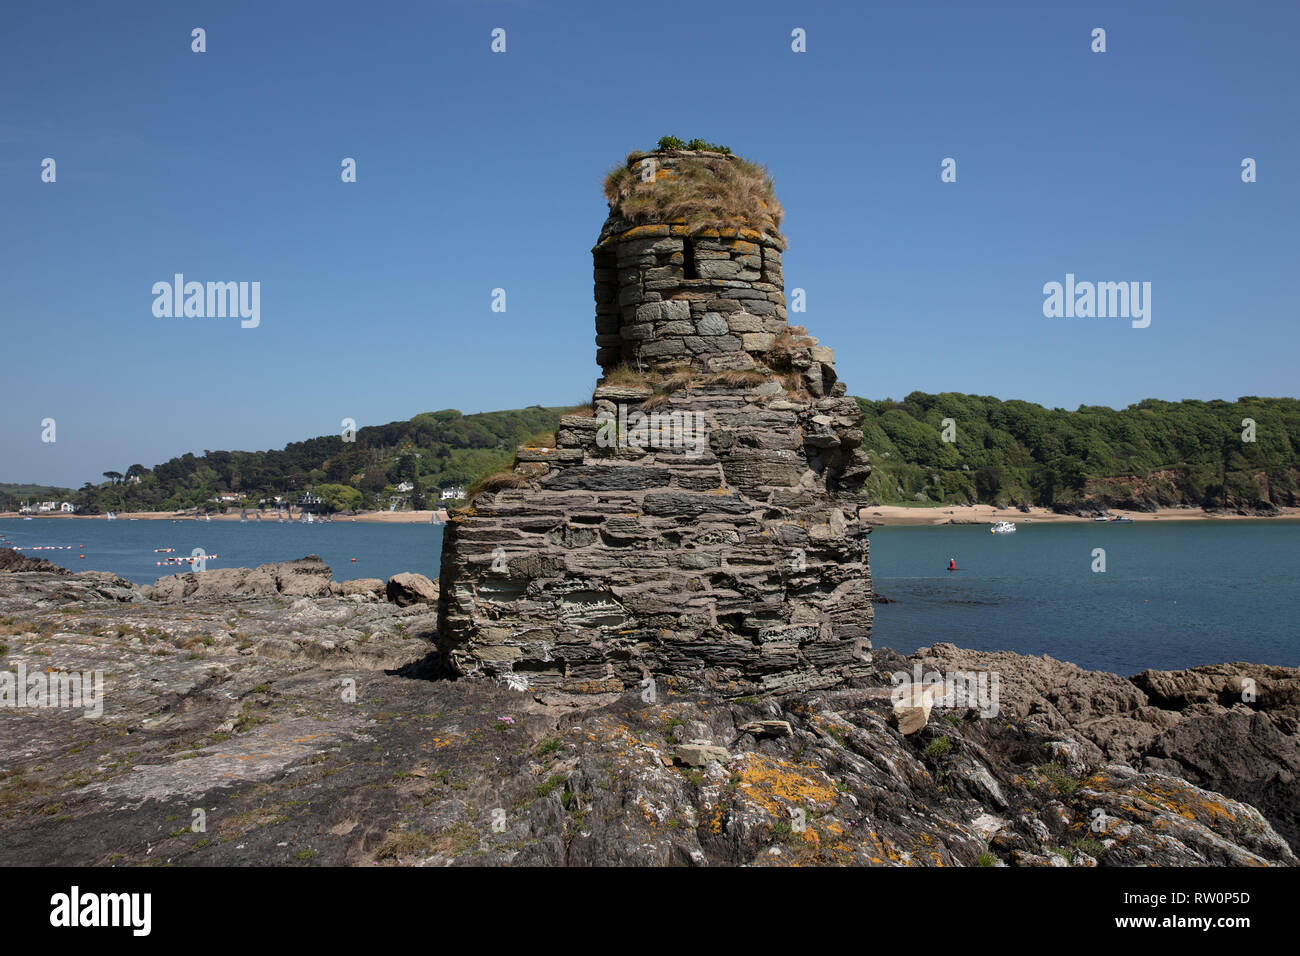 Salcombe Castle or Fort Charles is a ruined fortification just off the beach of North Sands in Salcombe, Devon, England. Stock Photo